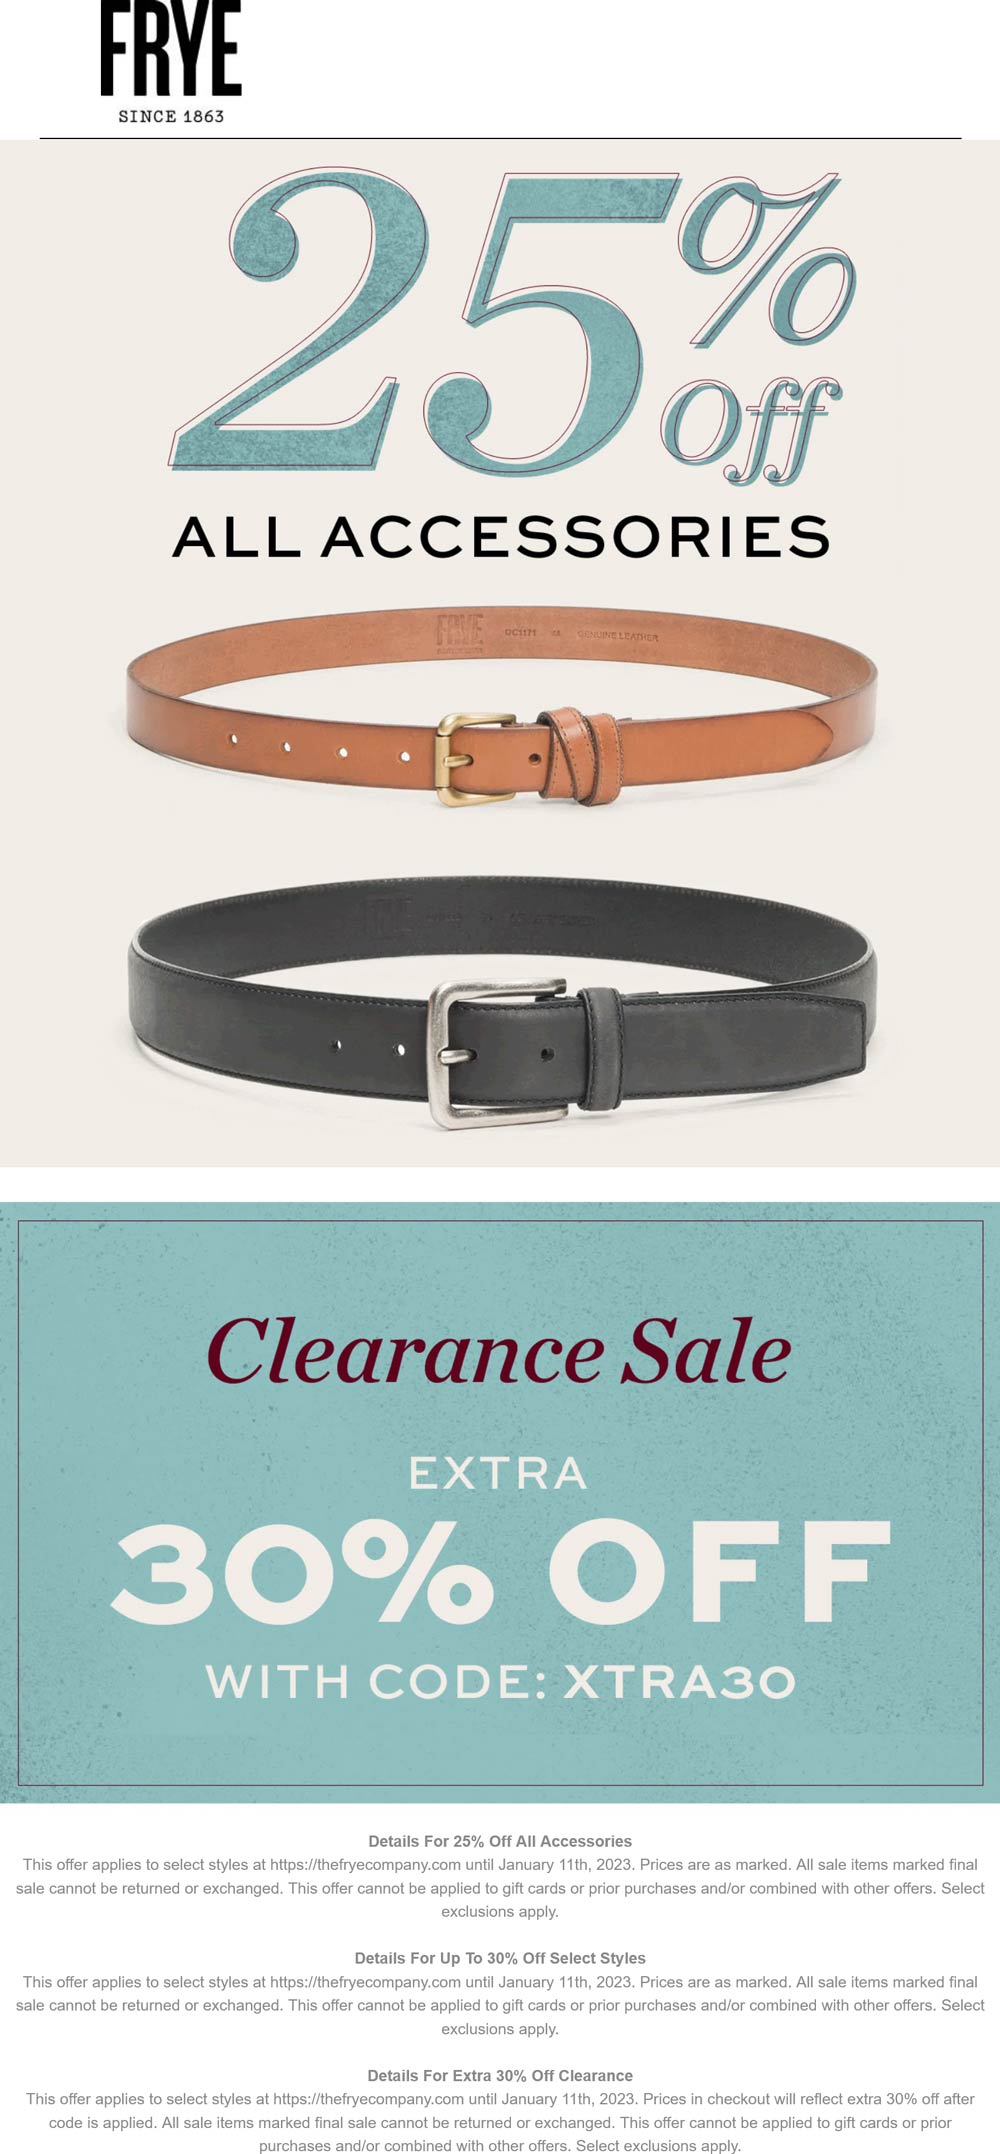 Frye stores Coupon  25% off accessories & 30% off clearance at The Frye Company #frye 